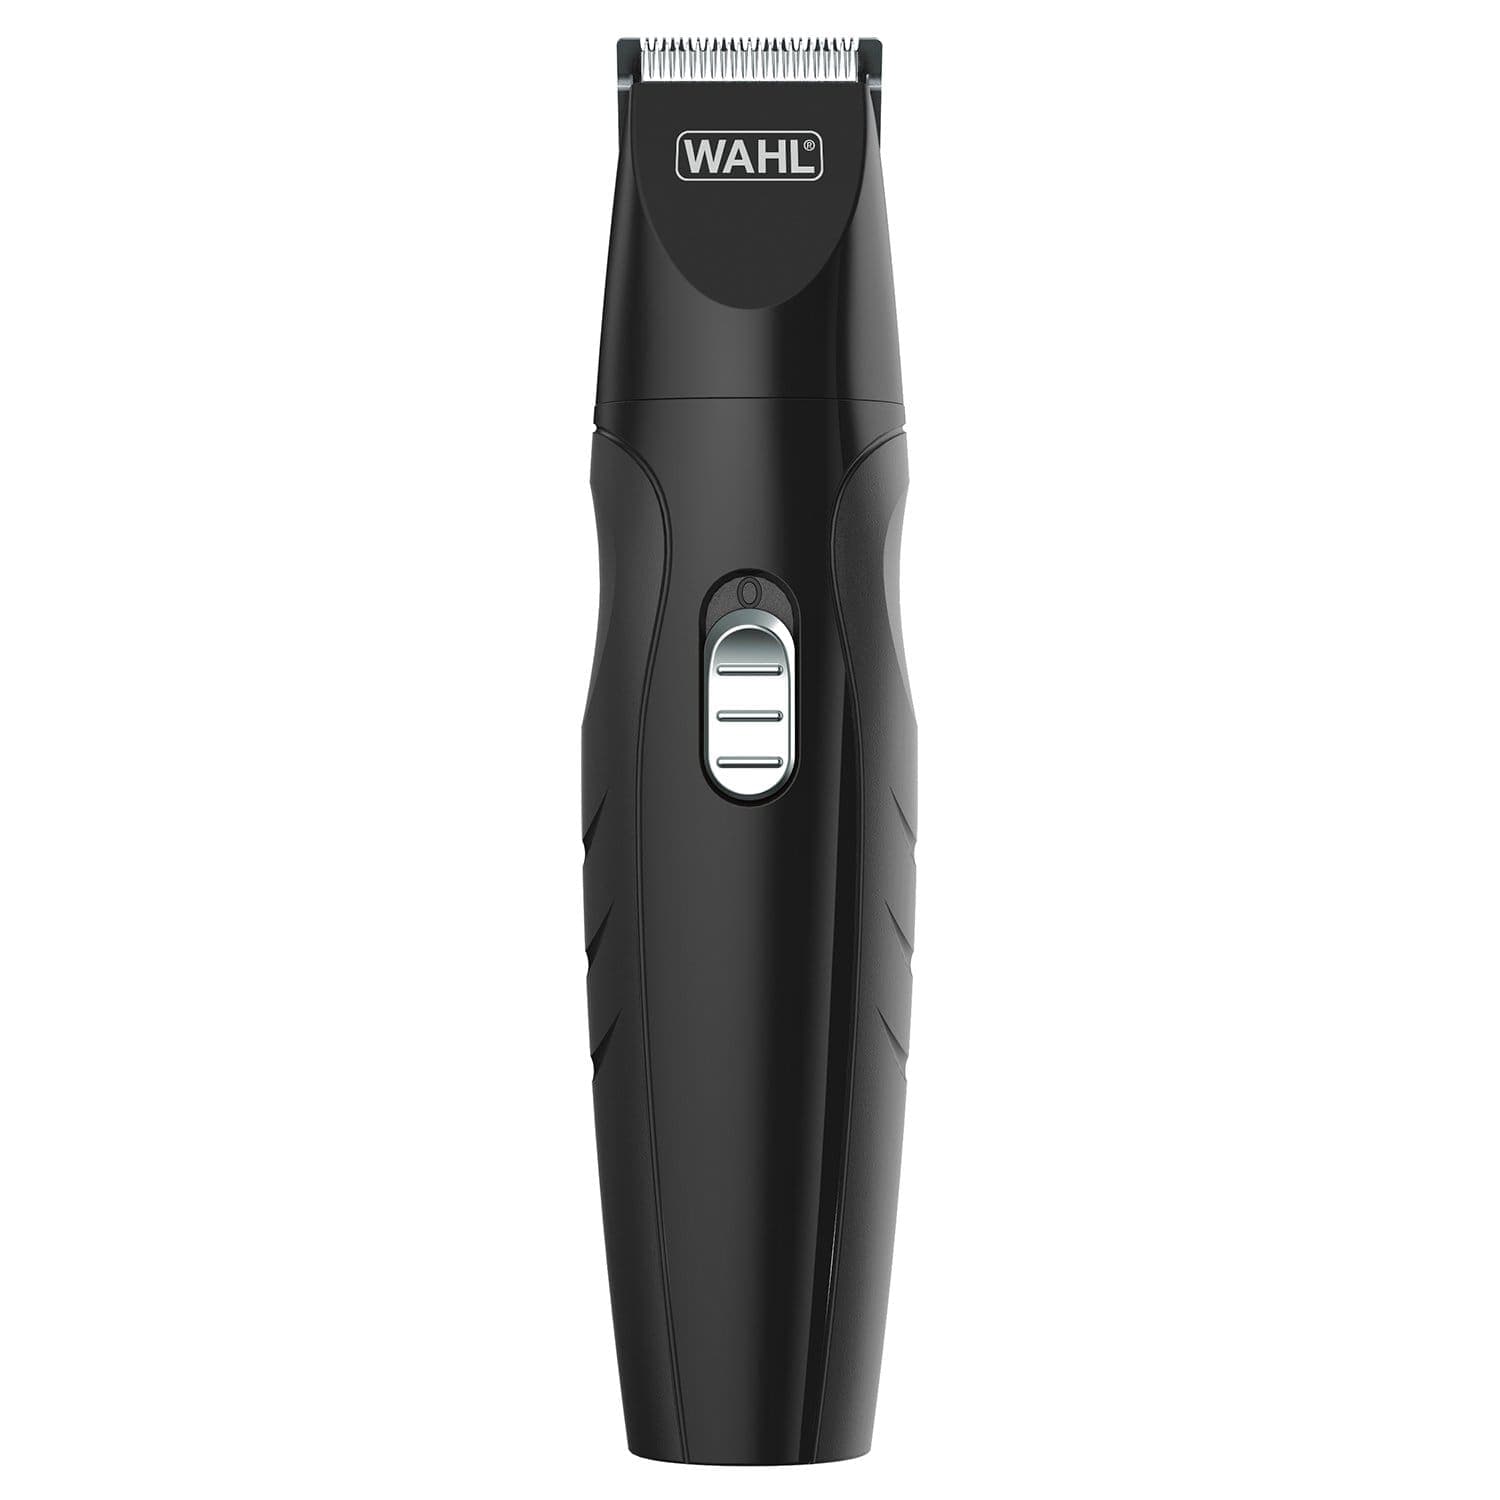 Wahl Groomsman All-In-One Trimmer + Body Groomer - 9685-017